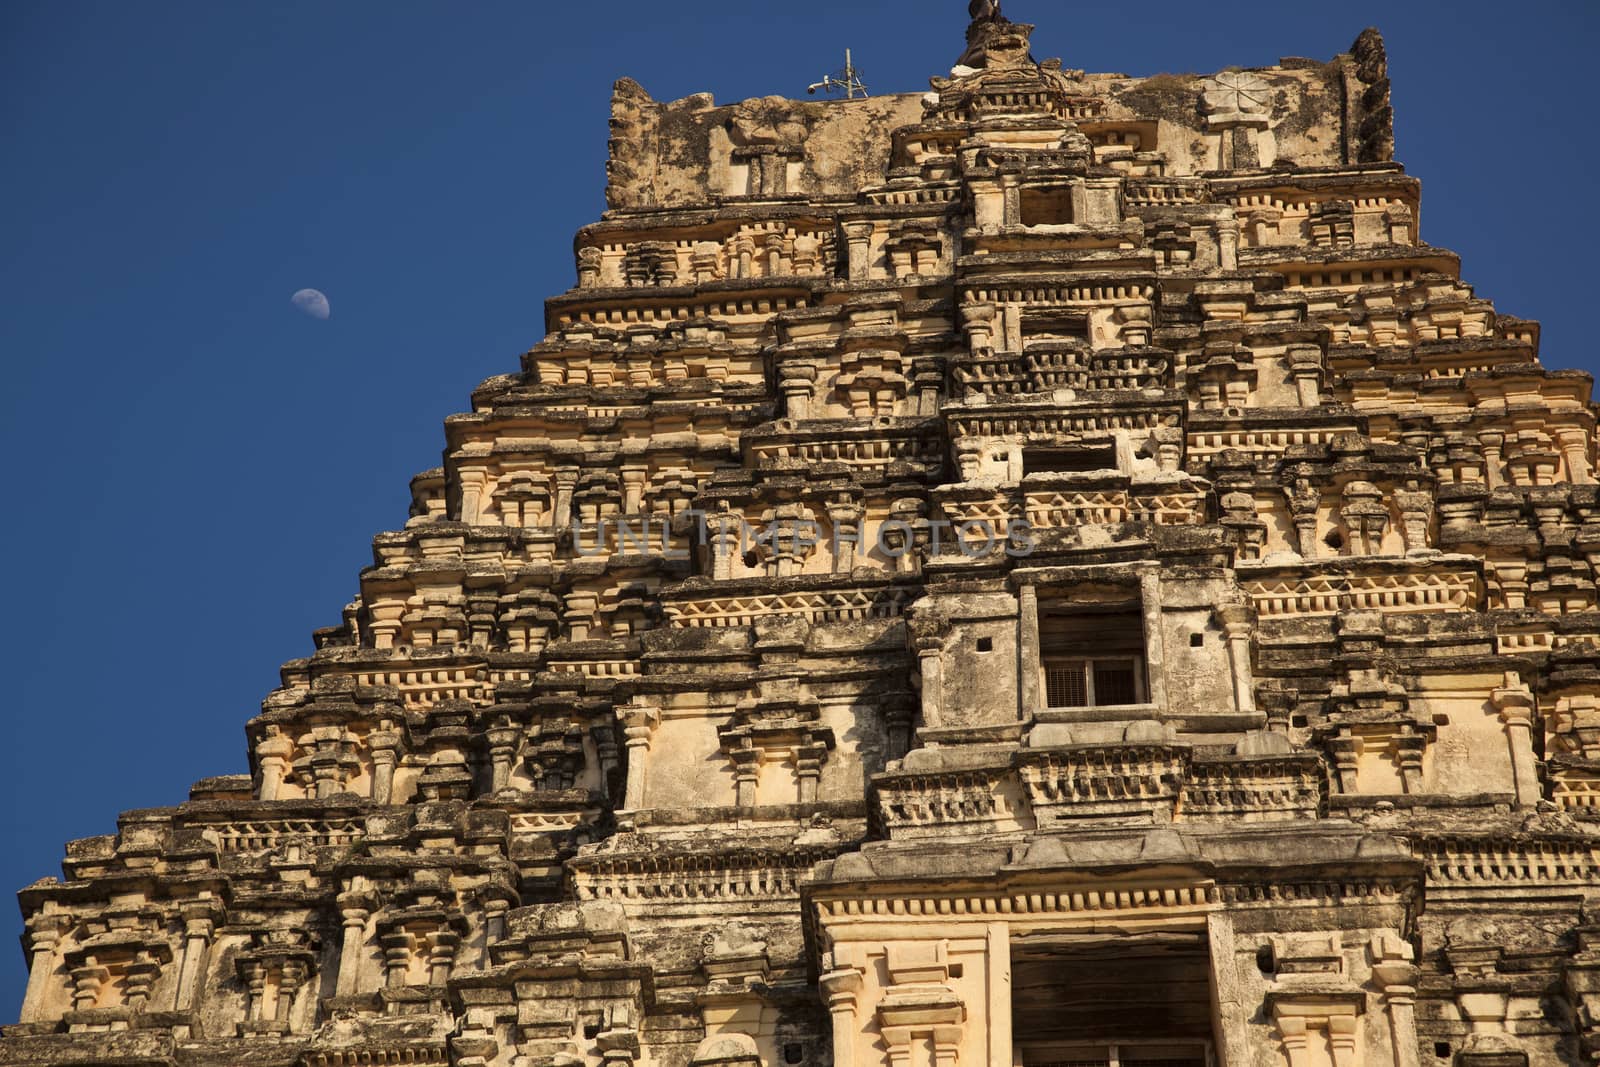 Virupaksha - Vijayanagar Temple - one of the highlight of the Hampi temple complex in India, with moon in the back